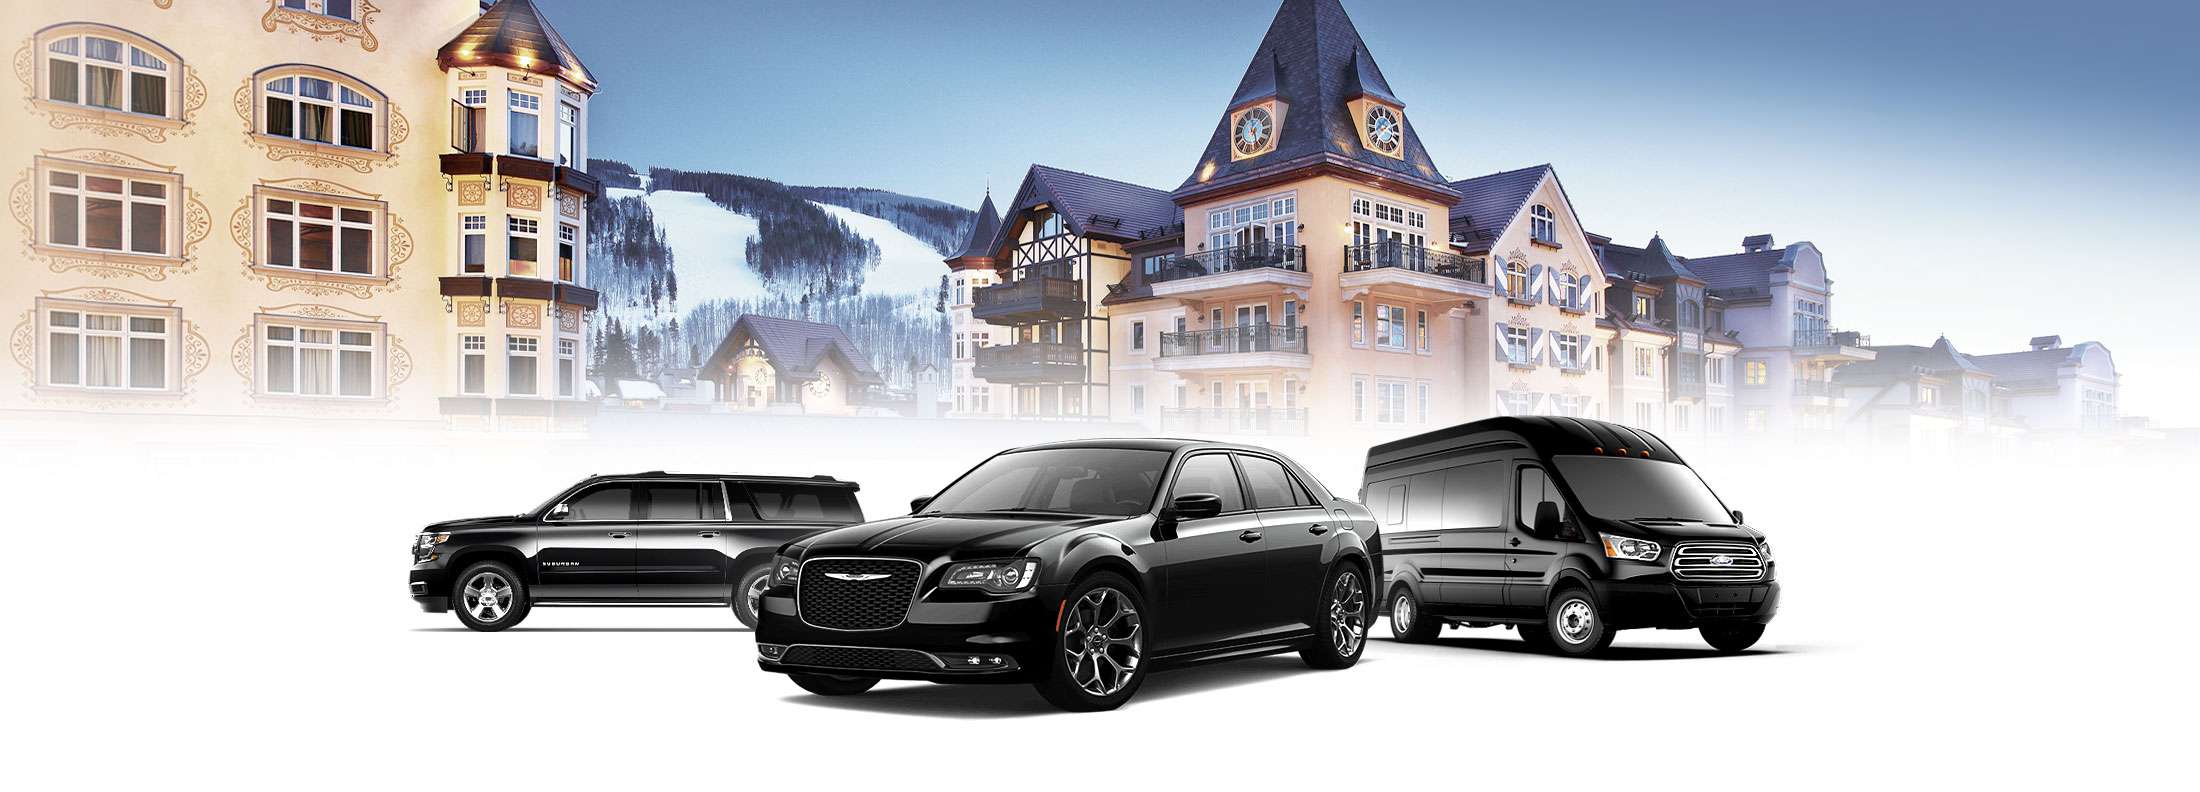 Elevate Your Journey with Beaver Creek Limo Car Service: Unparalleled Luxury and Convenience